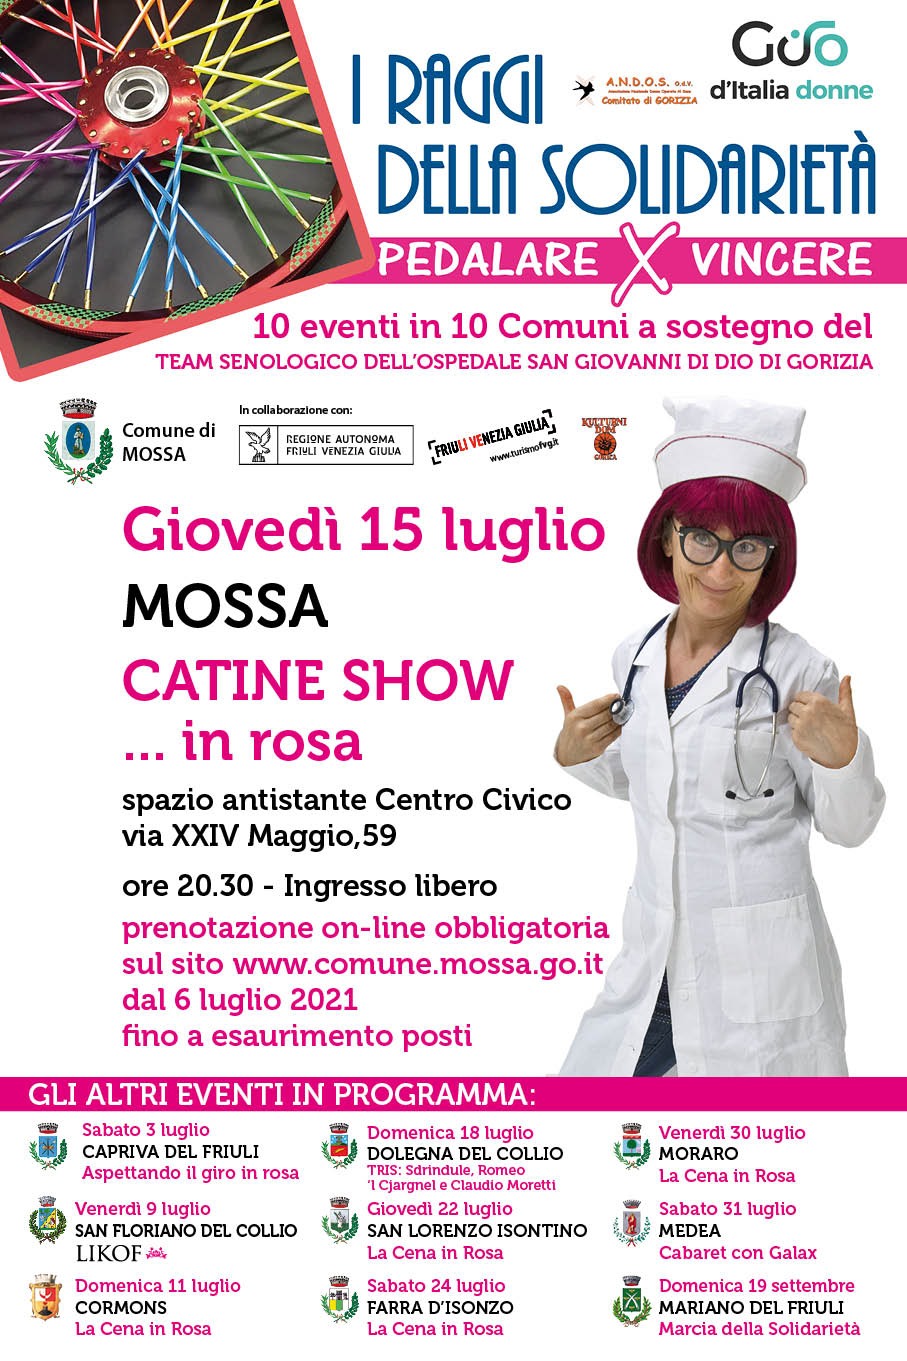 Catine show…in rosa